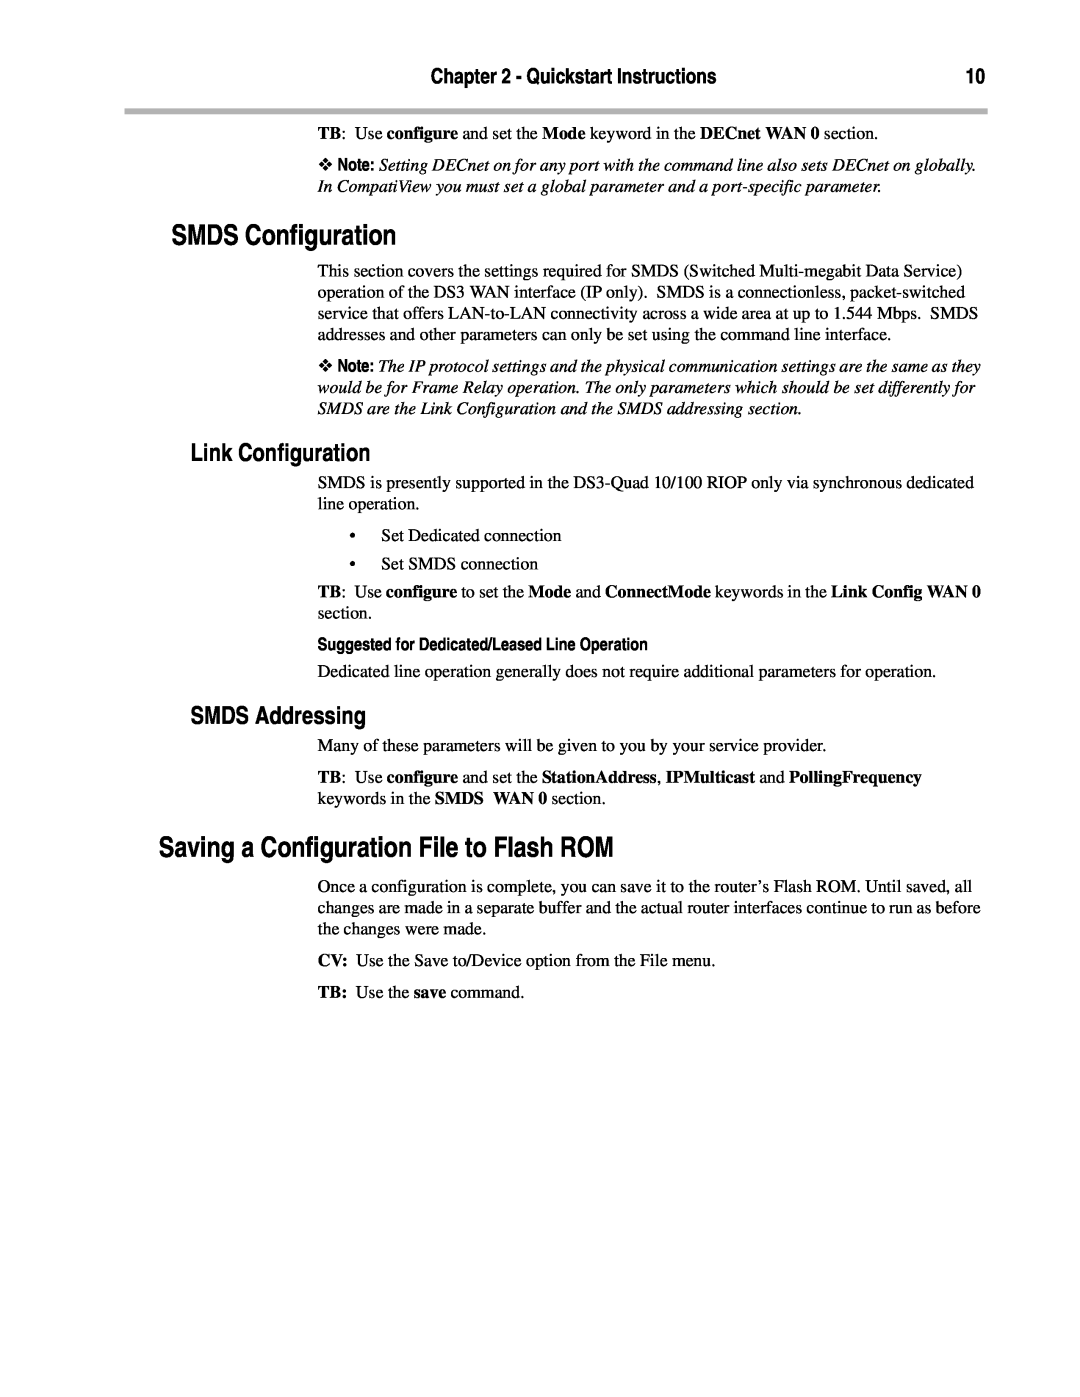 Compatible Systems DS3 SMDS Configuration, Saving a Configuration File to Flash ROM, Link Configuration, SMDS Addressing 